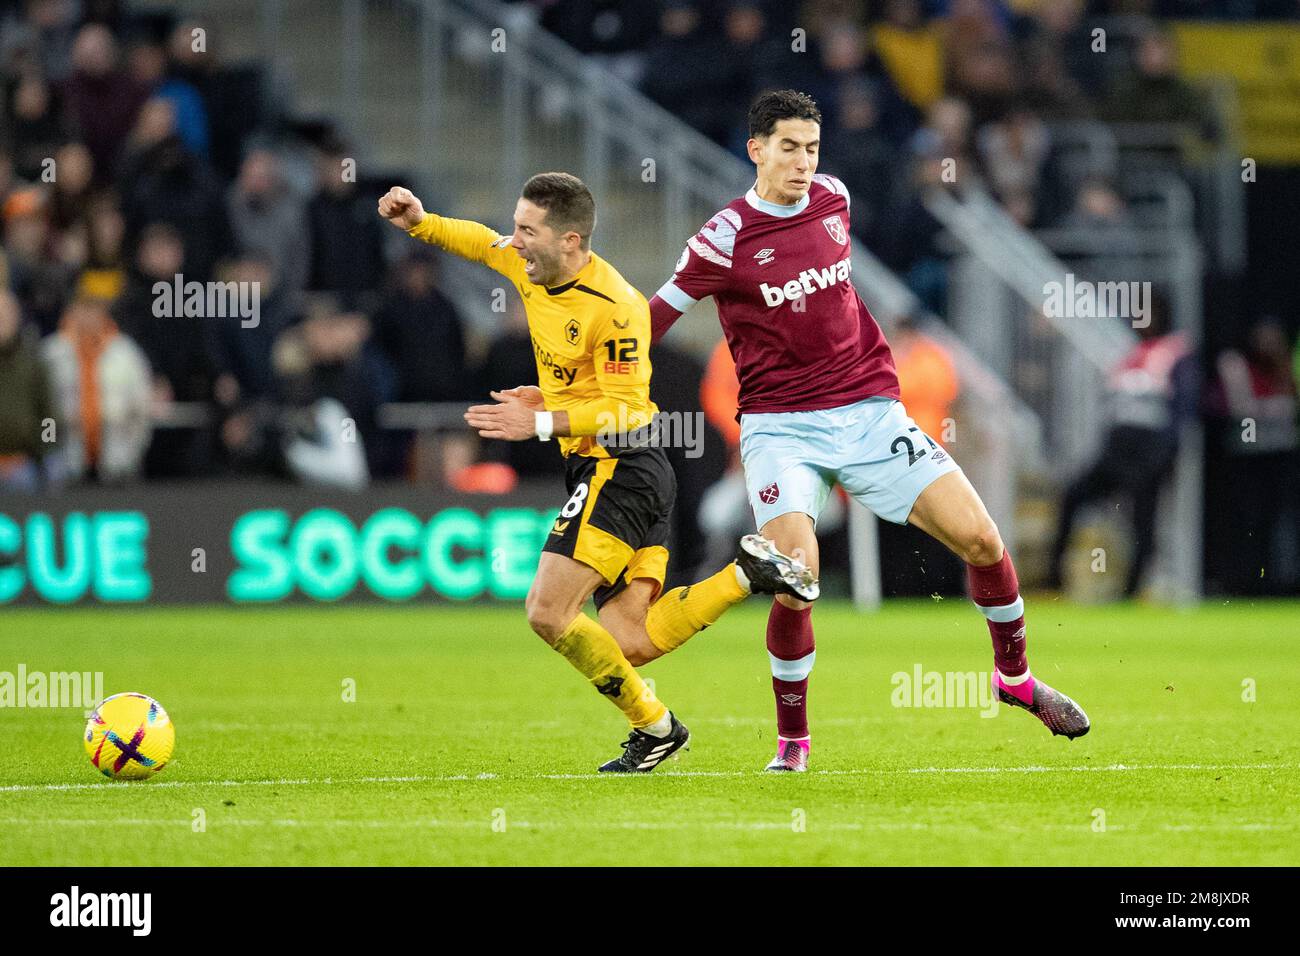 Joao Moutinho of Wolves is fouled by Nayef Aguerd of West Ham during the Premier League match between Wolverhampton Wanderers and West Ham United at Molineux, Wolverhampton on Saturday 14th January 2023